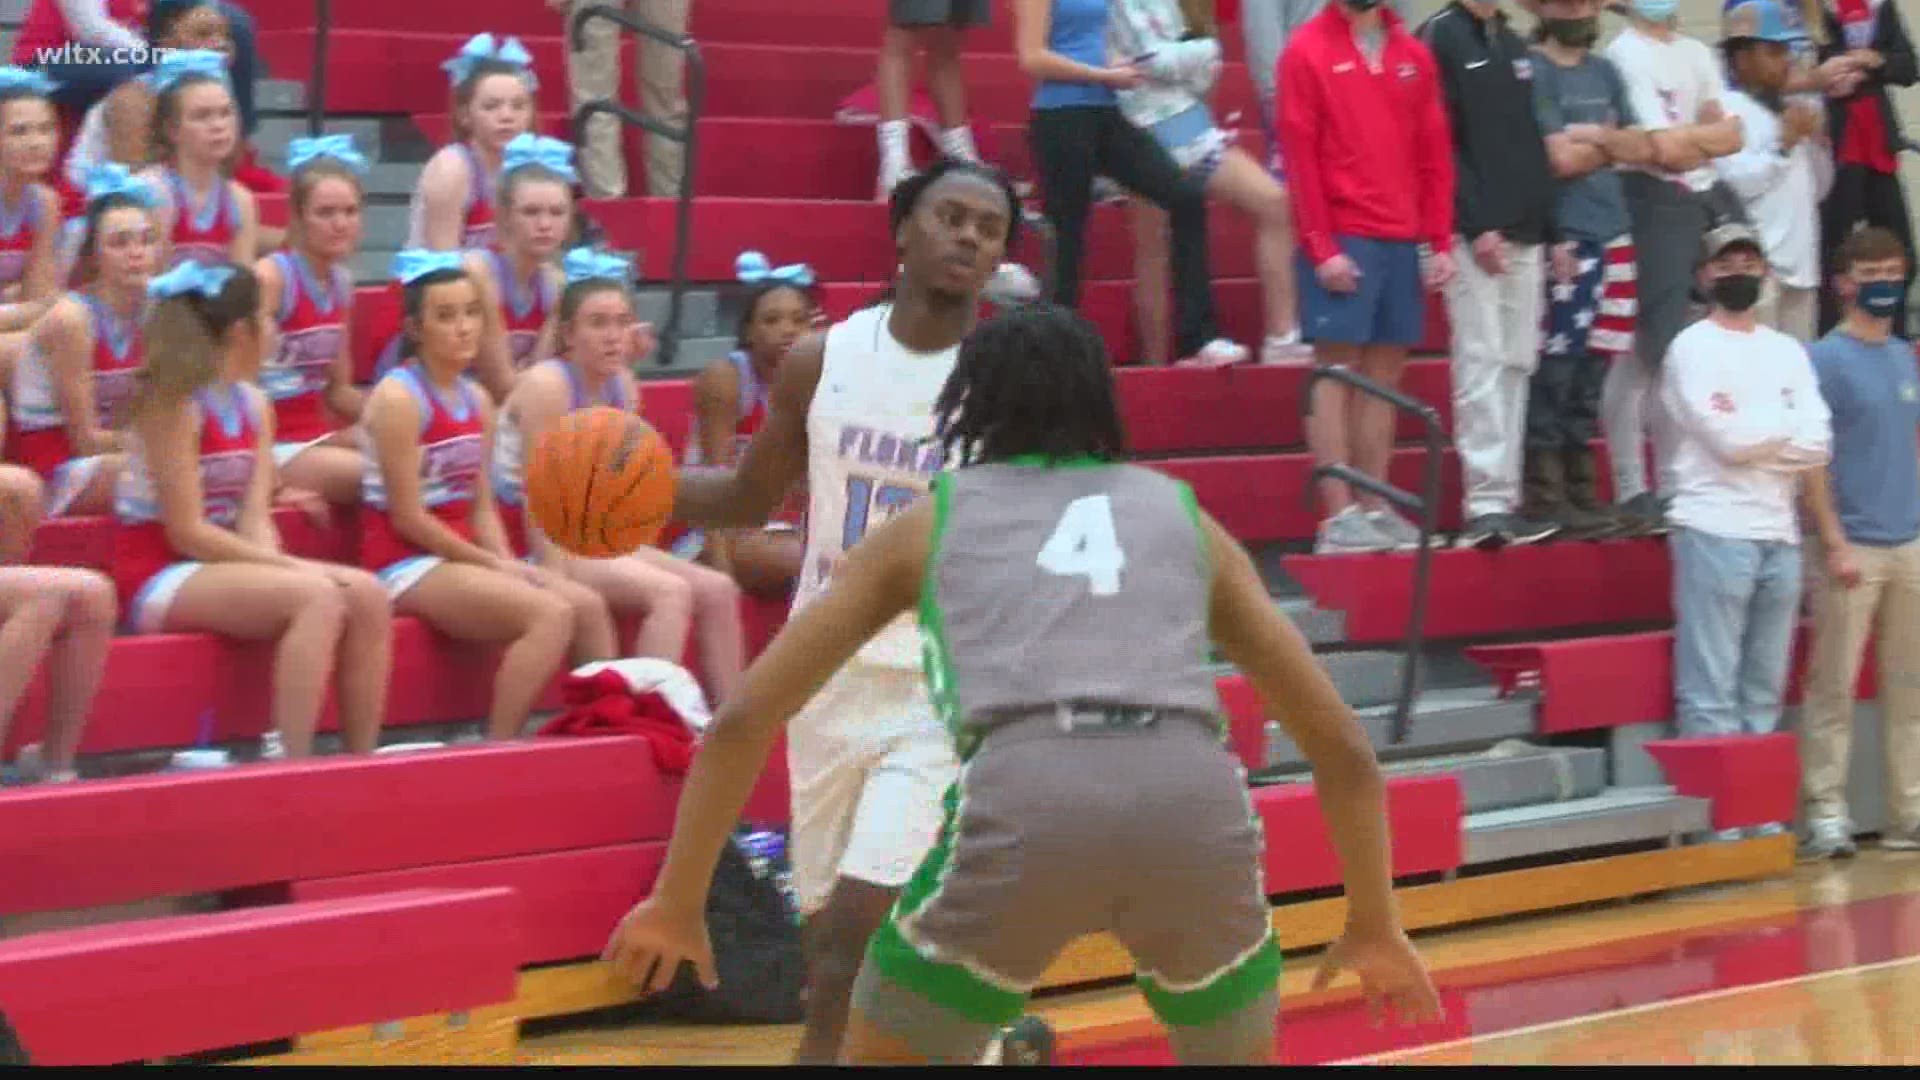 Highlights from games at Lexington, Camden and A.C. Flora.